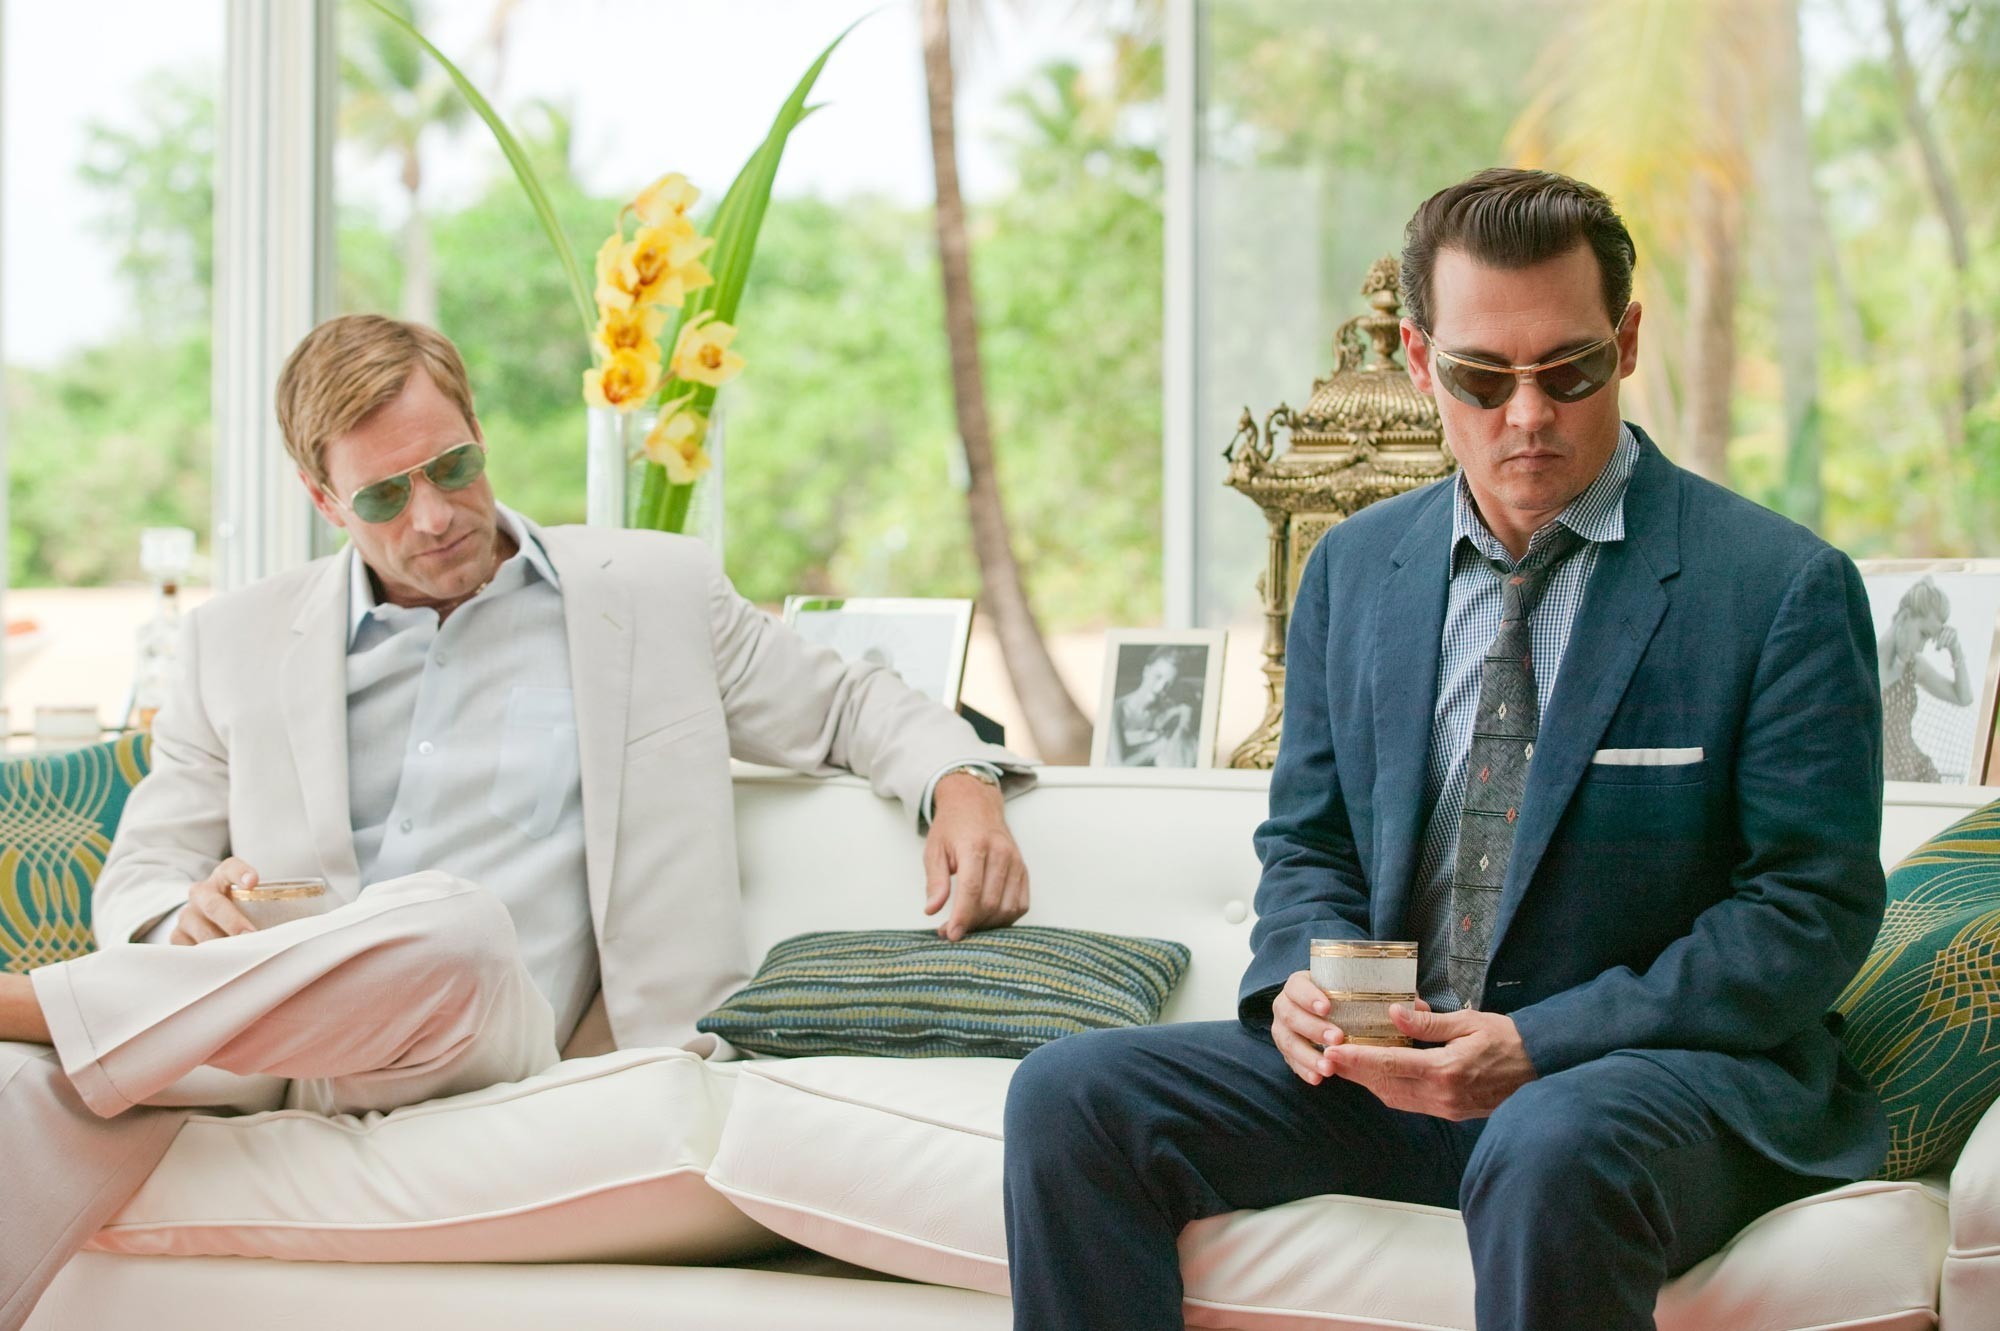 Aaron Eckhart stars as Sanderson and Johnny Depp stars as Paul Kemp in FilmDistrict's The Rum Diary (2011)